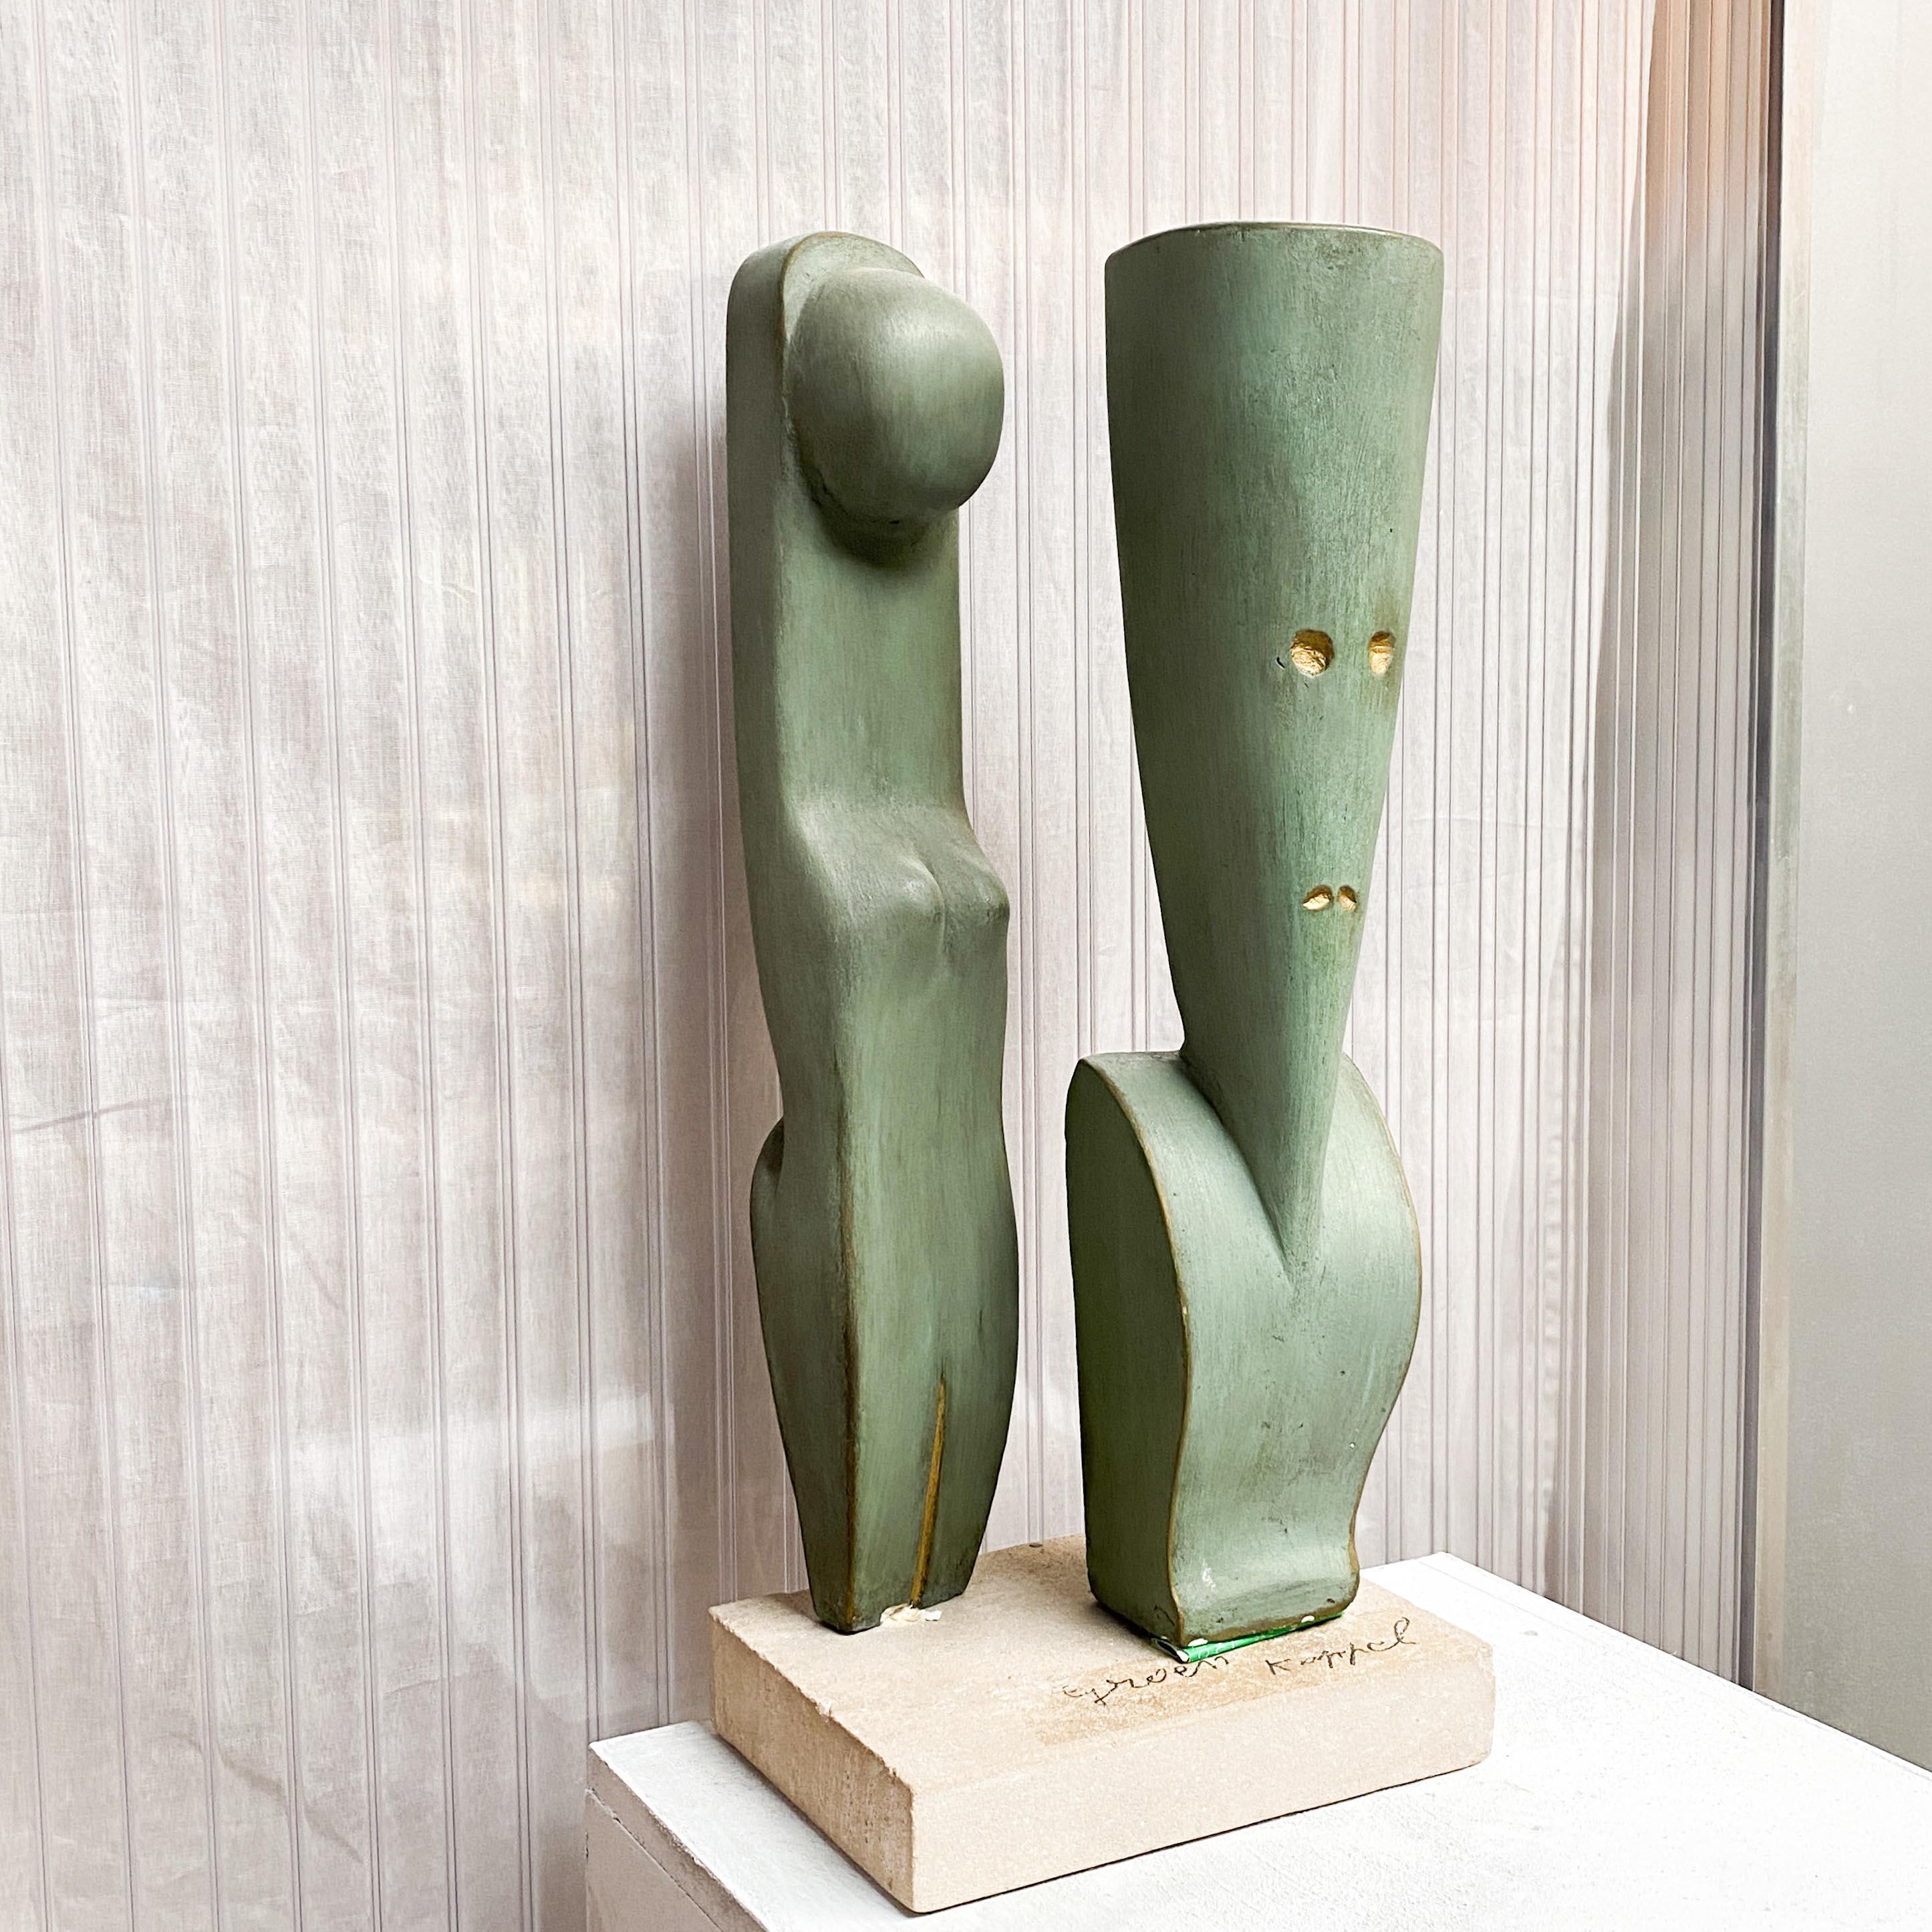 Interesting modernist gypsum sculpture of a stylized couple. Made by an unknown Belgian artist.

An intruding pair of abstract shapes, one representing a female form, one a man. Stylized shapes, reminiscent of ancient Egyptian sculptures. Hand